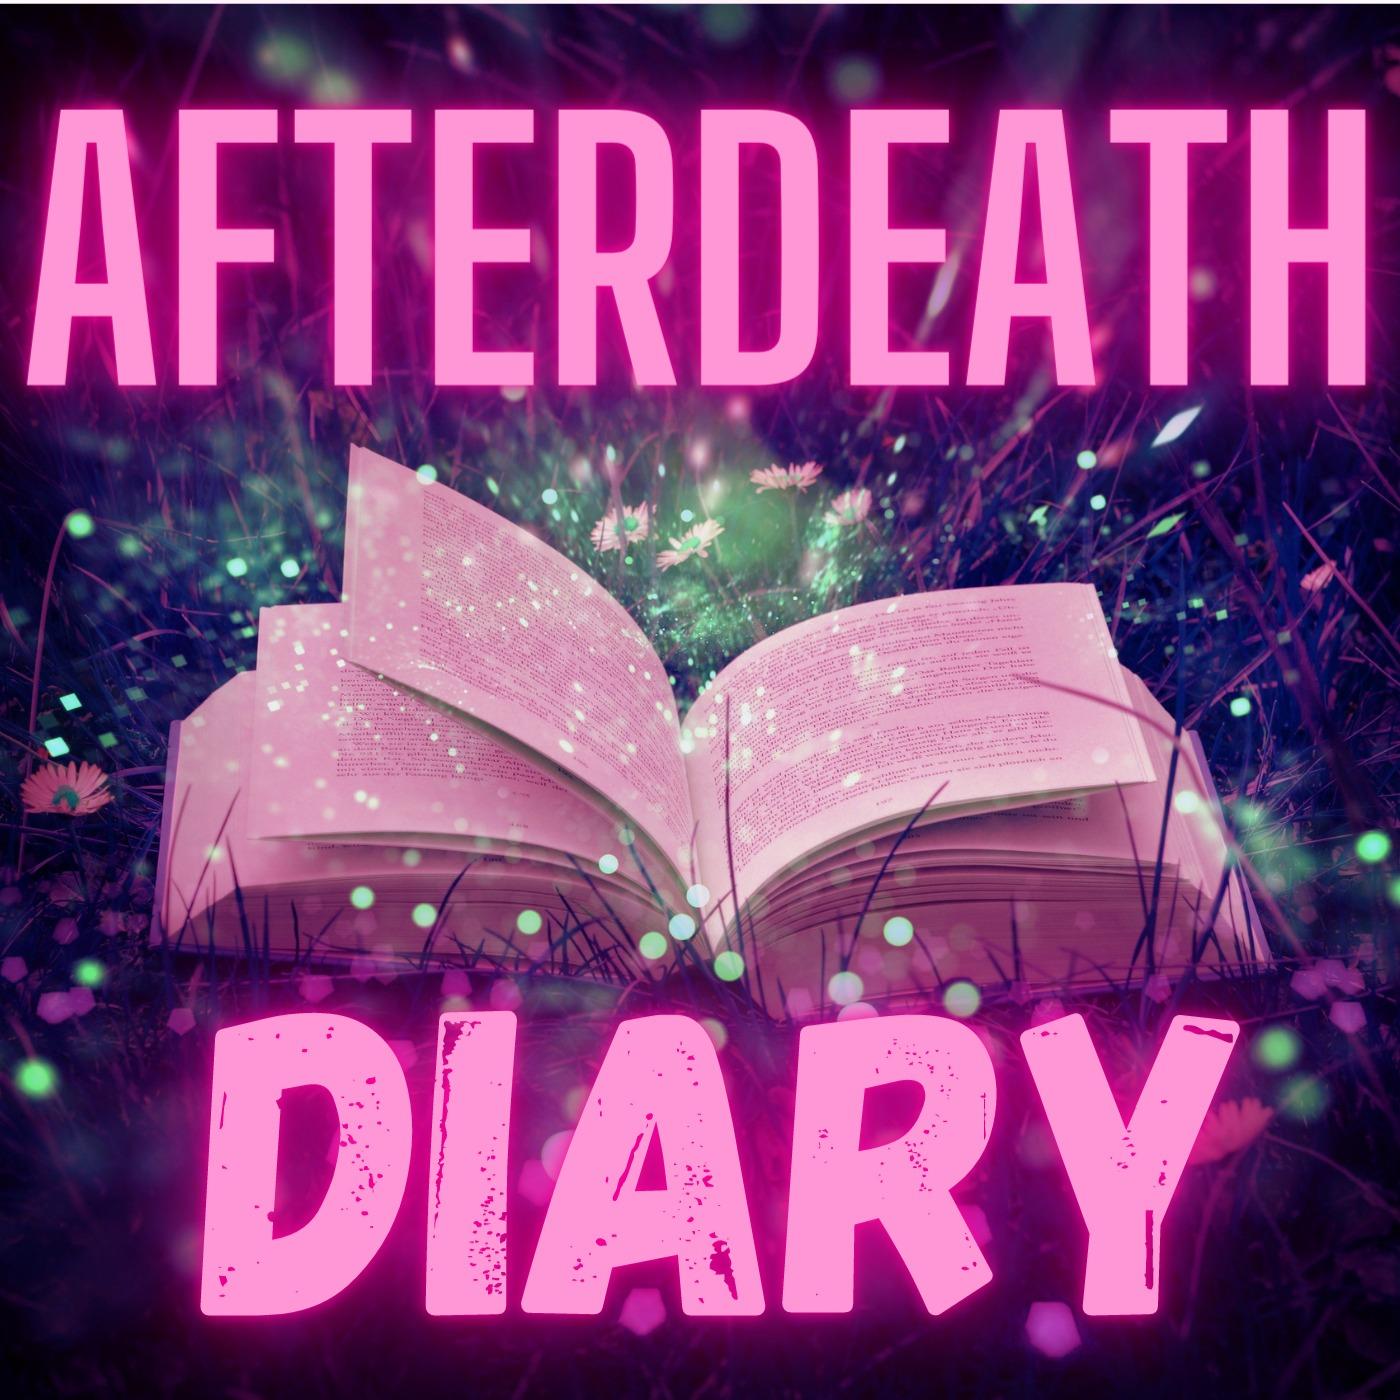 Afterdeath Diary